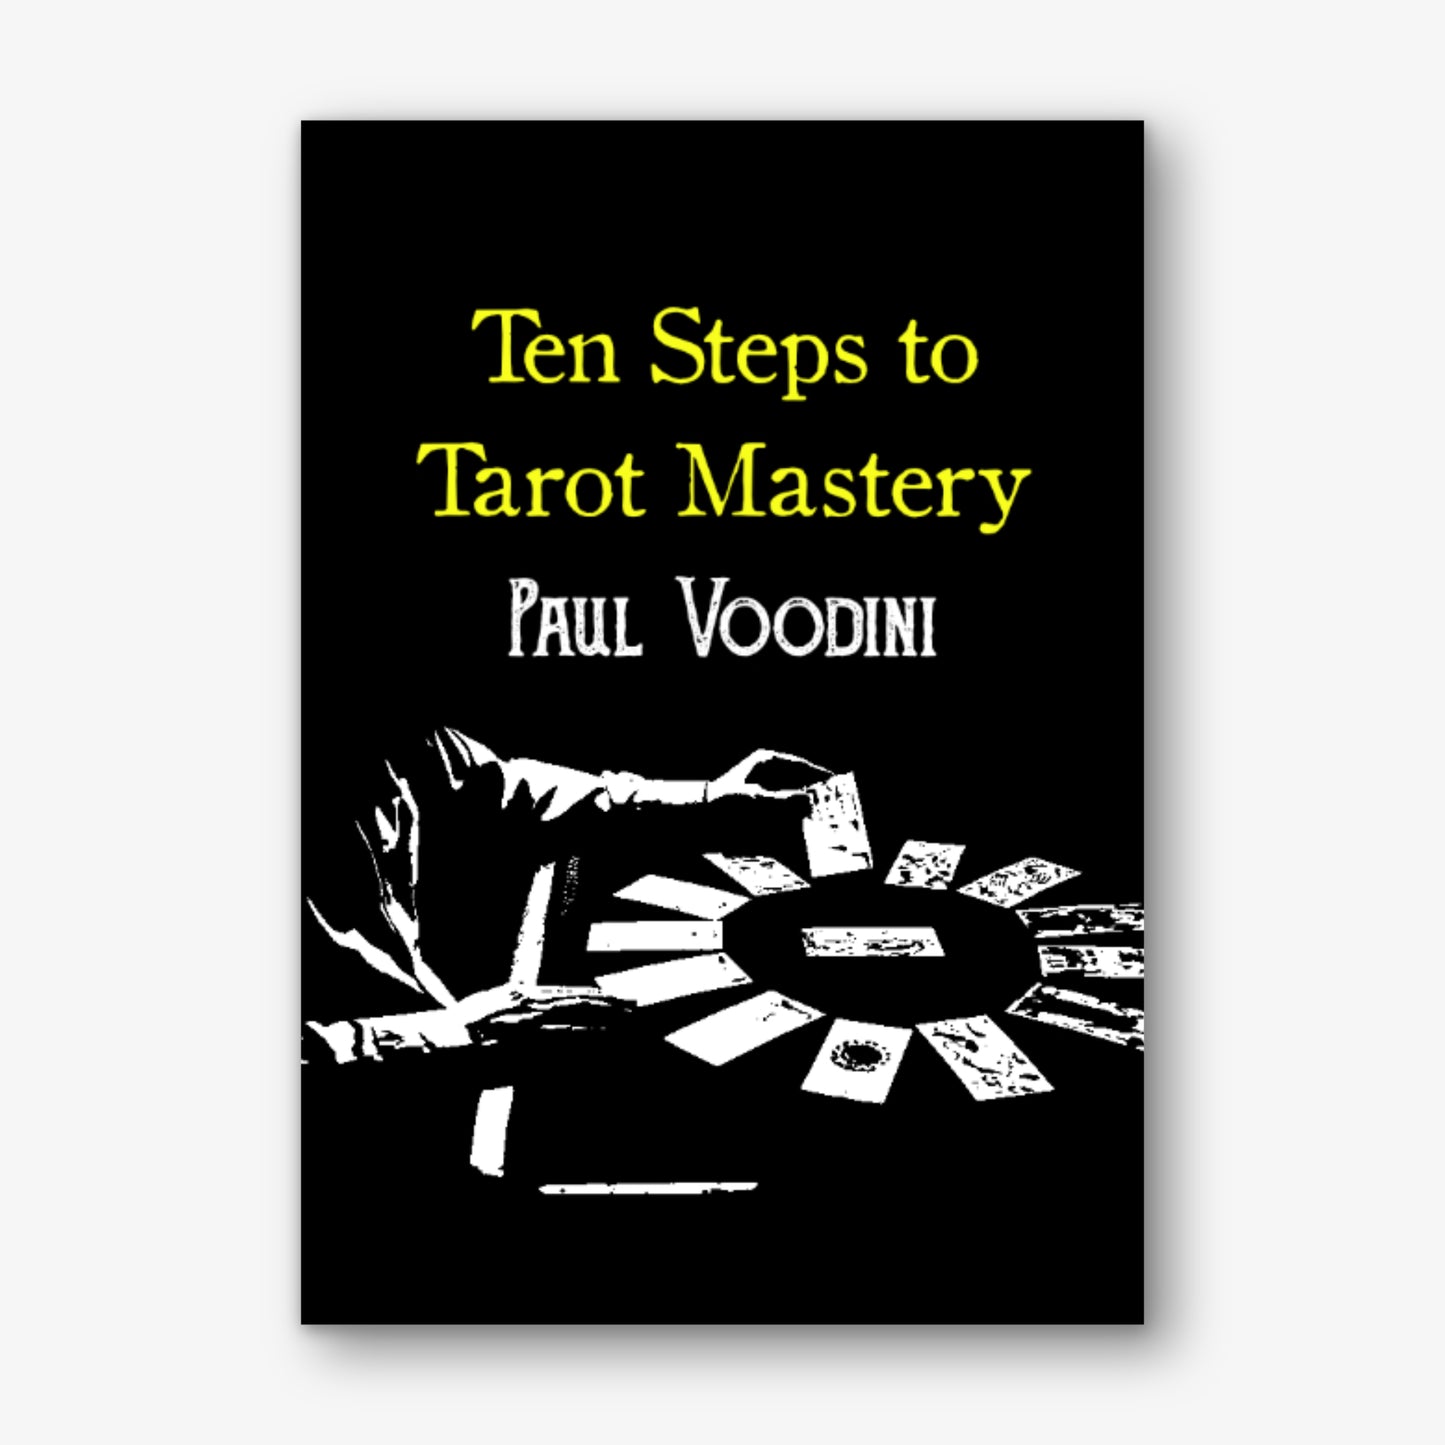 Ten Steps to Tarot Mastery by Paul Voodini